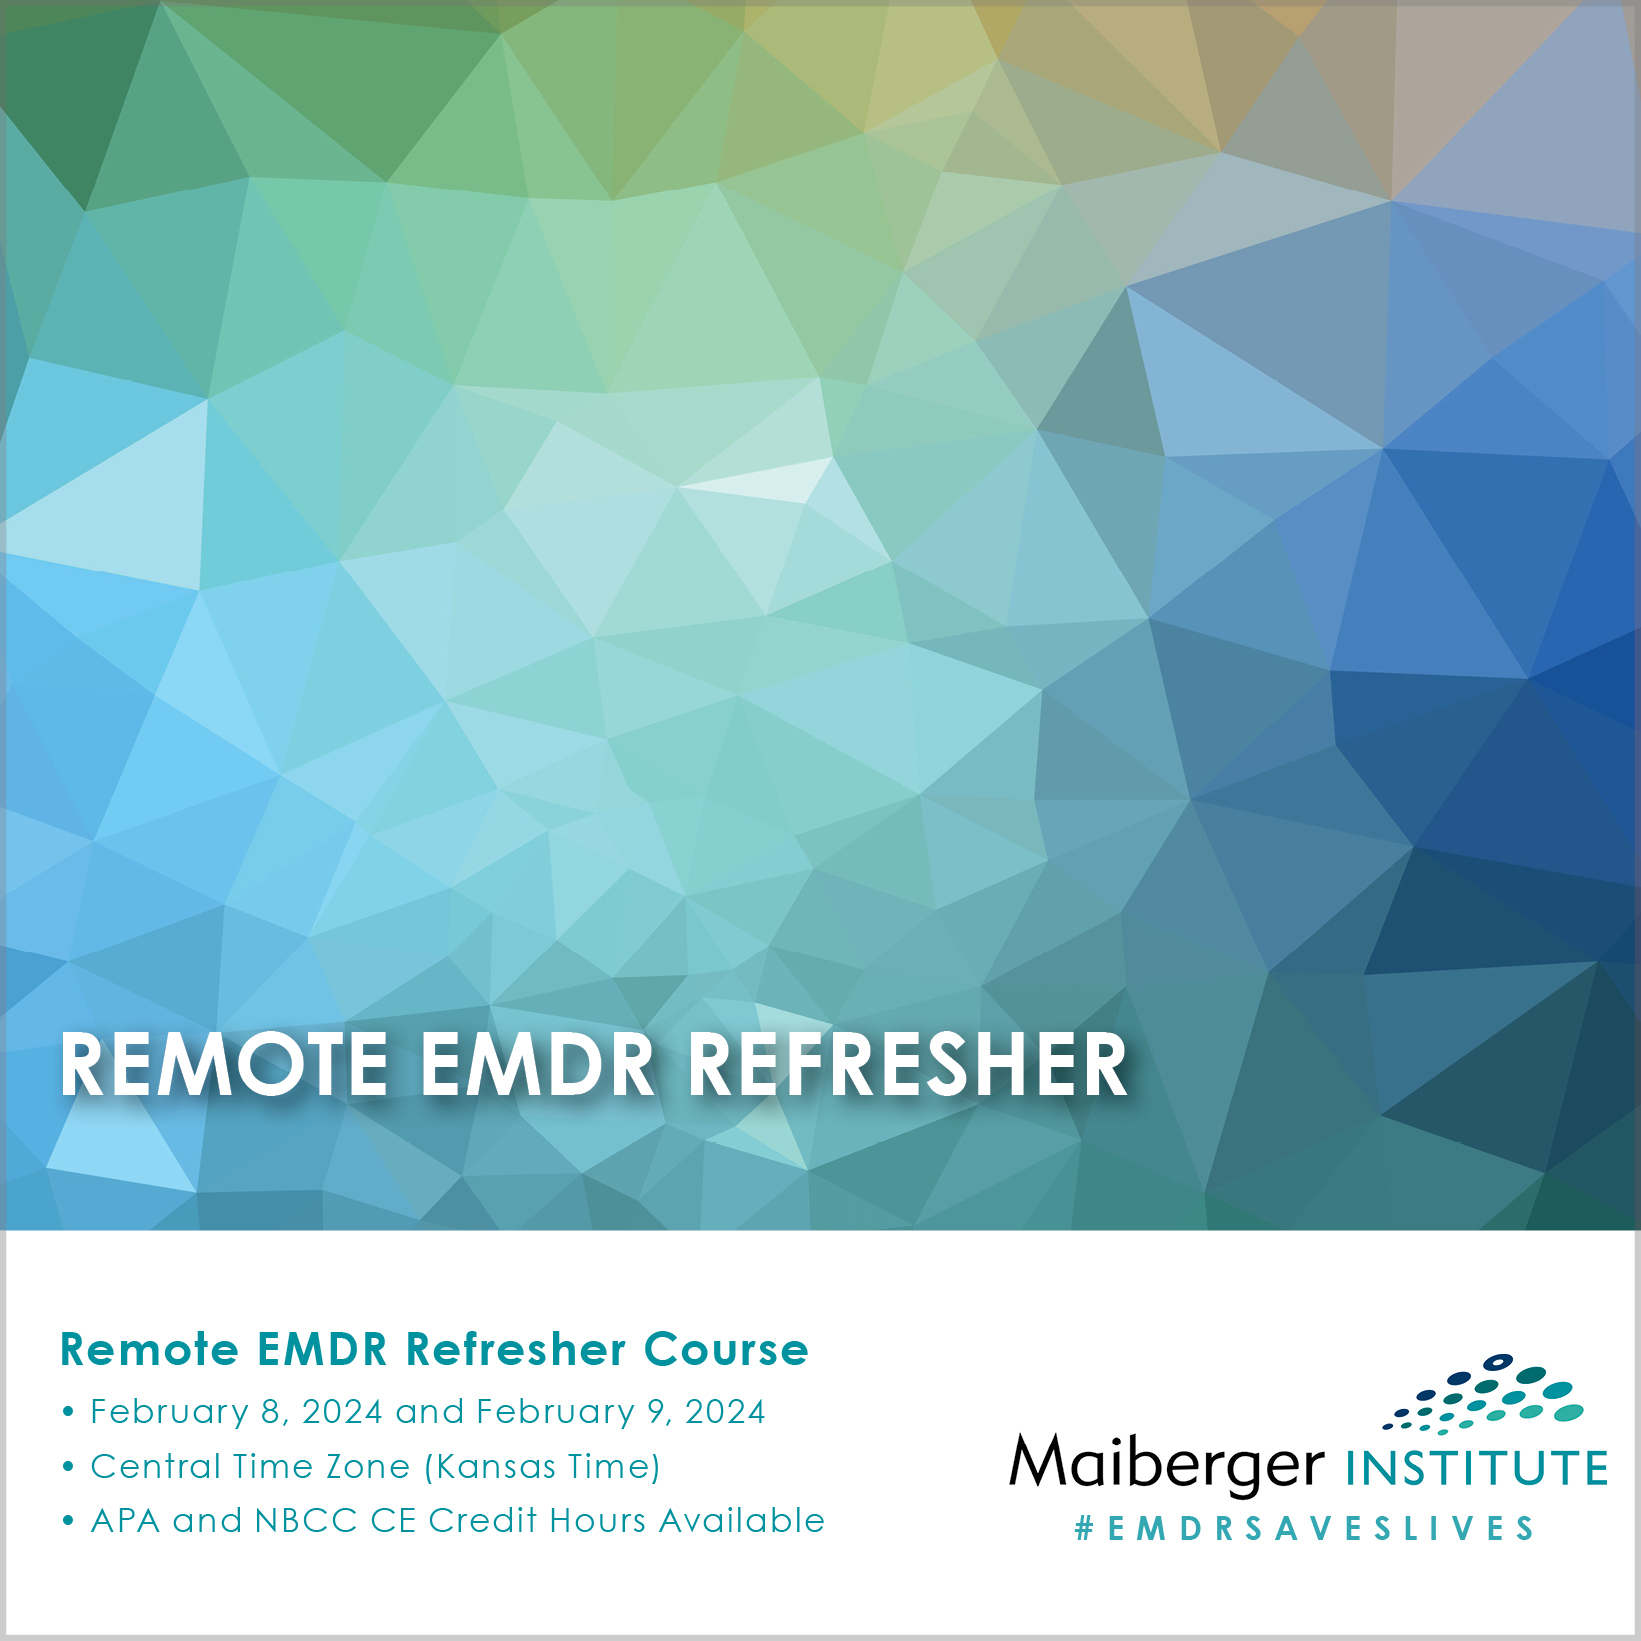 Remote EMDR Refresher Course February 8, 2024 and February 9, 2024